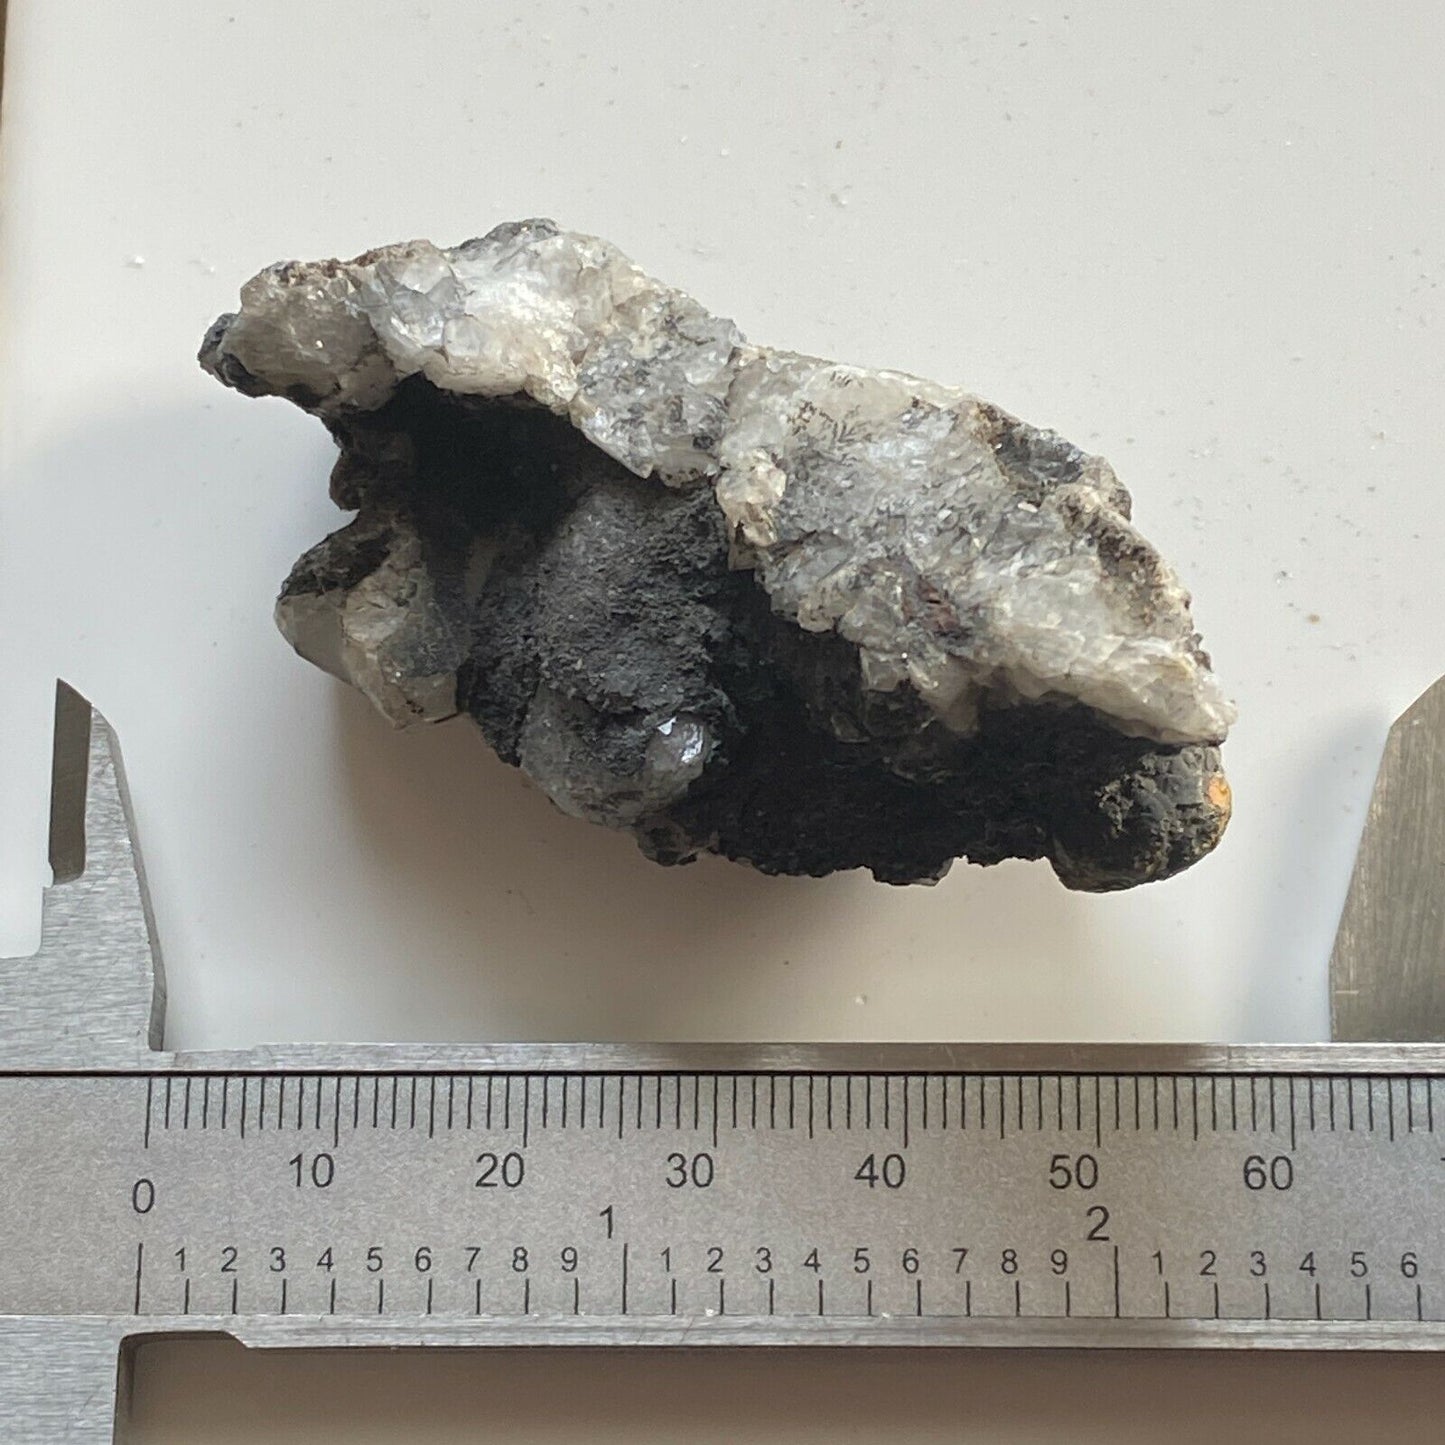 MINERAL SPECIMEN FROM DRY GILL MINE, CUMBRIA. 44g. MF6324